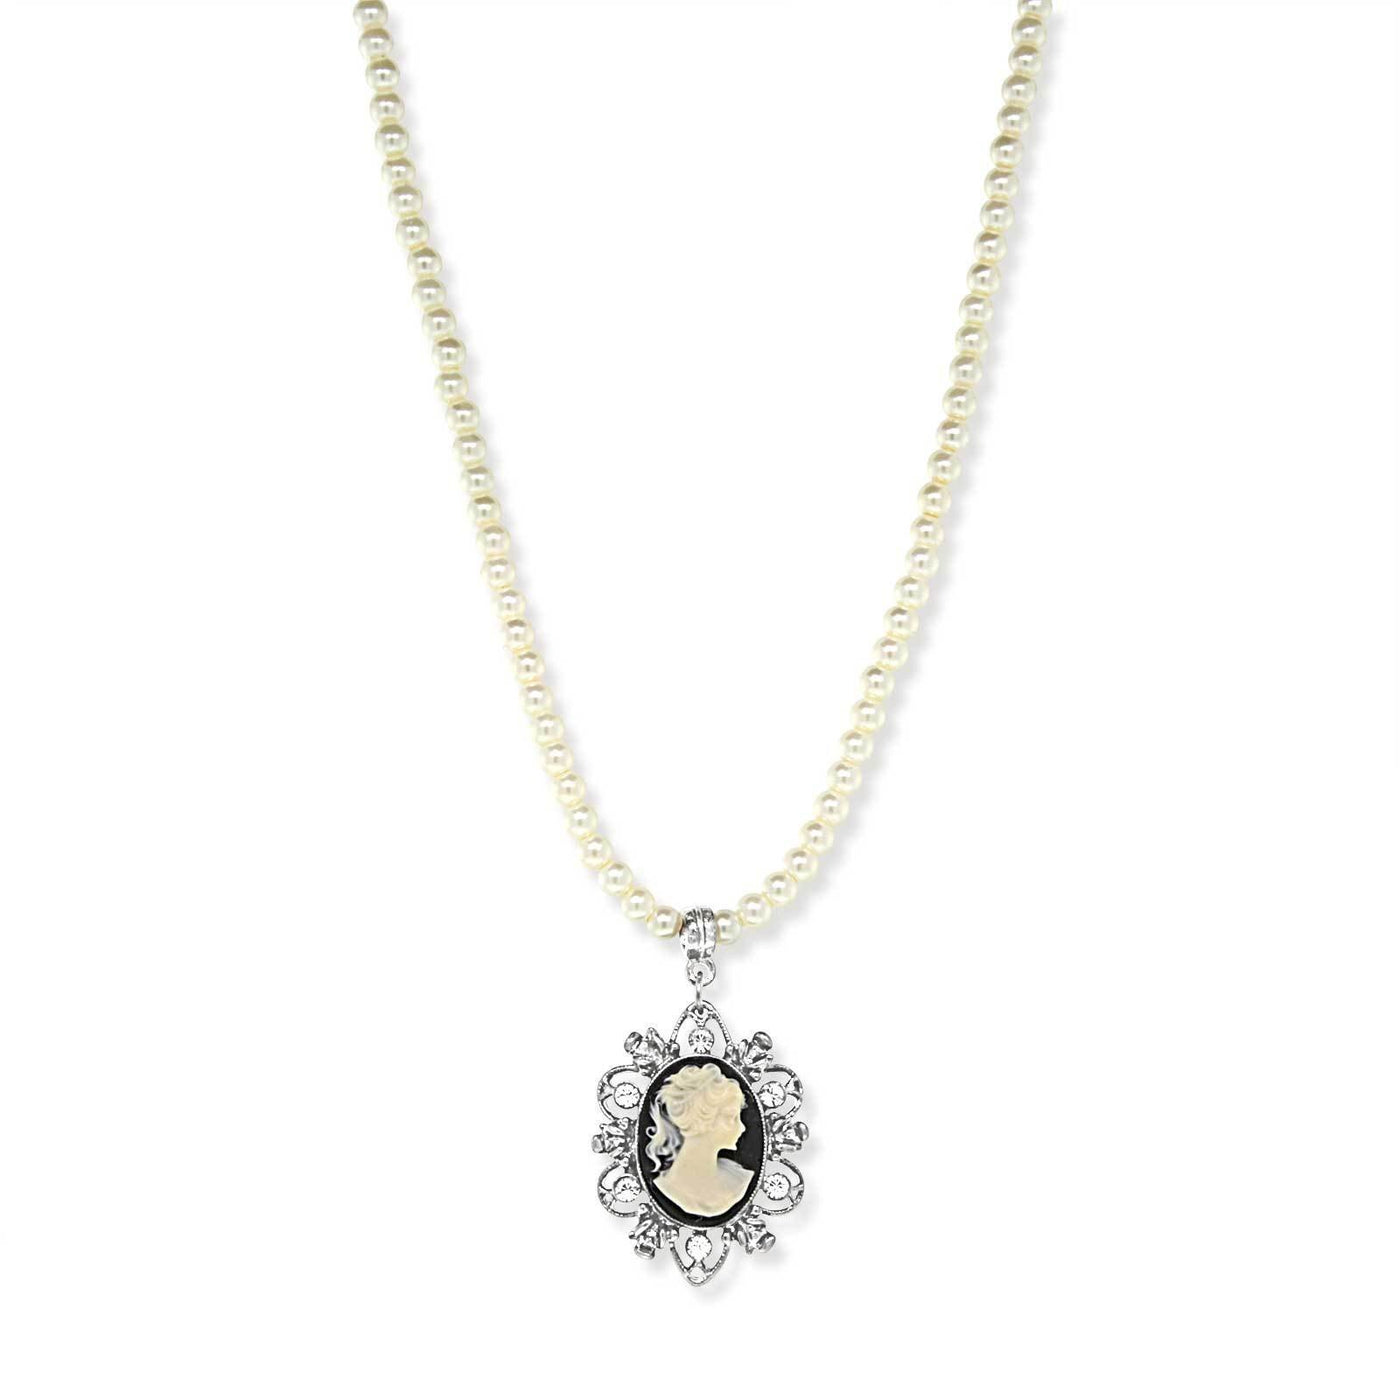 DOWNTON ABBEY BLACK OVAL CAMEO PEARL NECKLACE